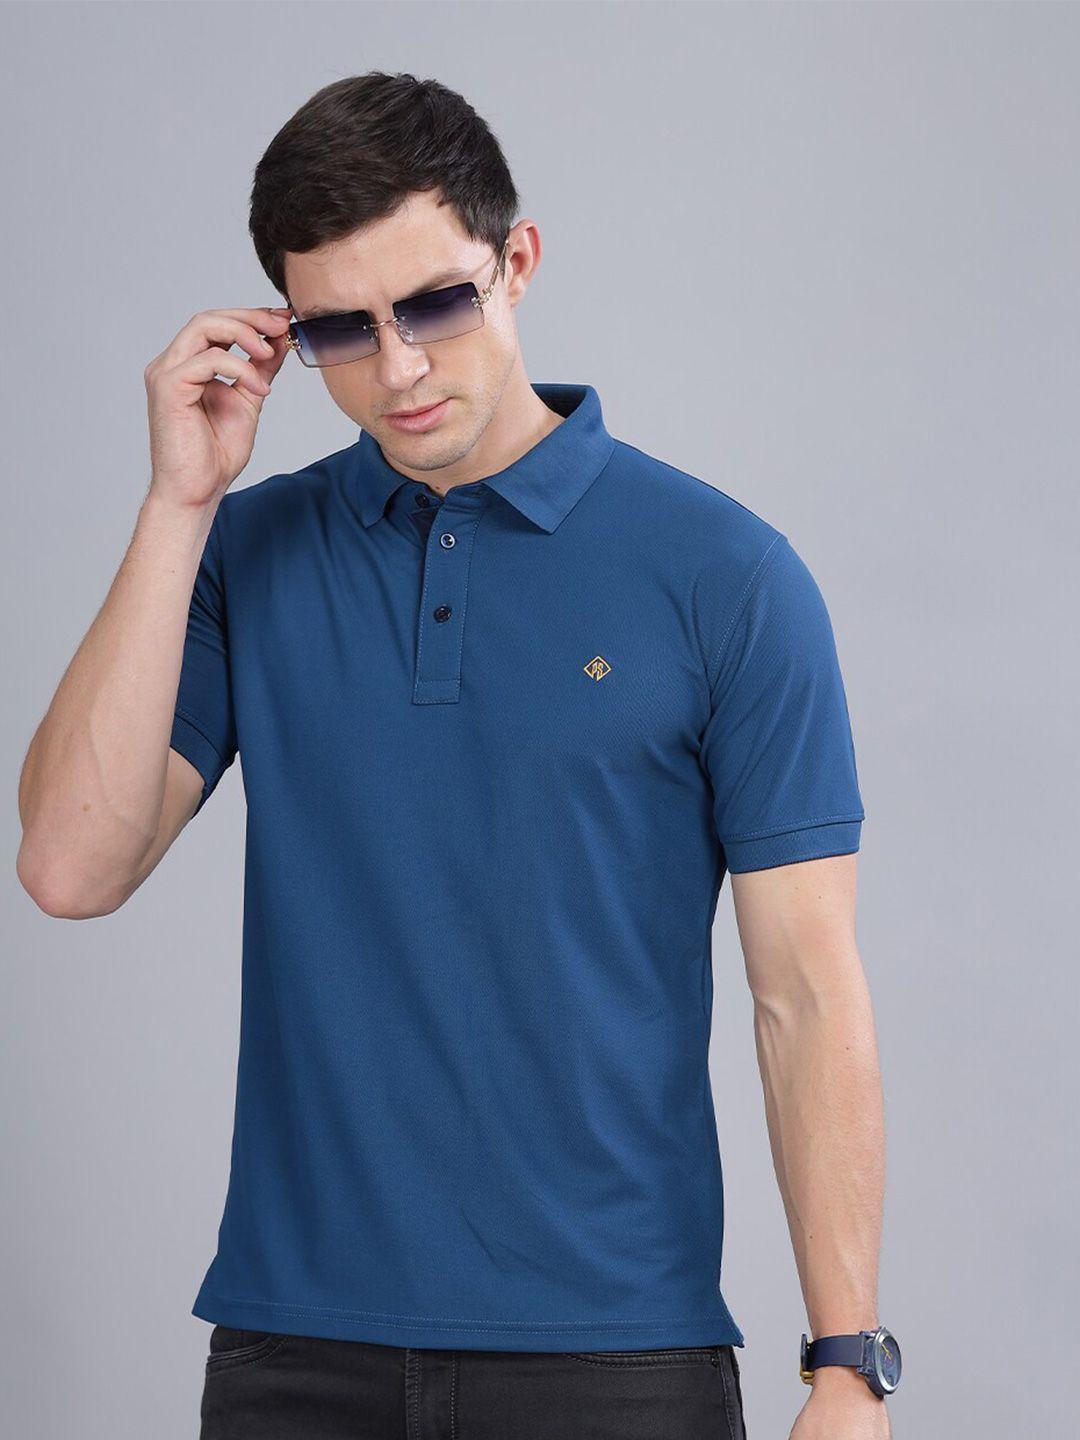 PAUL STREET Slim Fit Moisture Wicking Dry Fit Polo Collar T-shirt